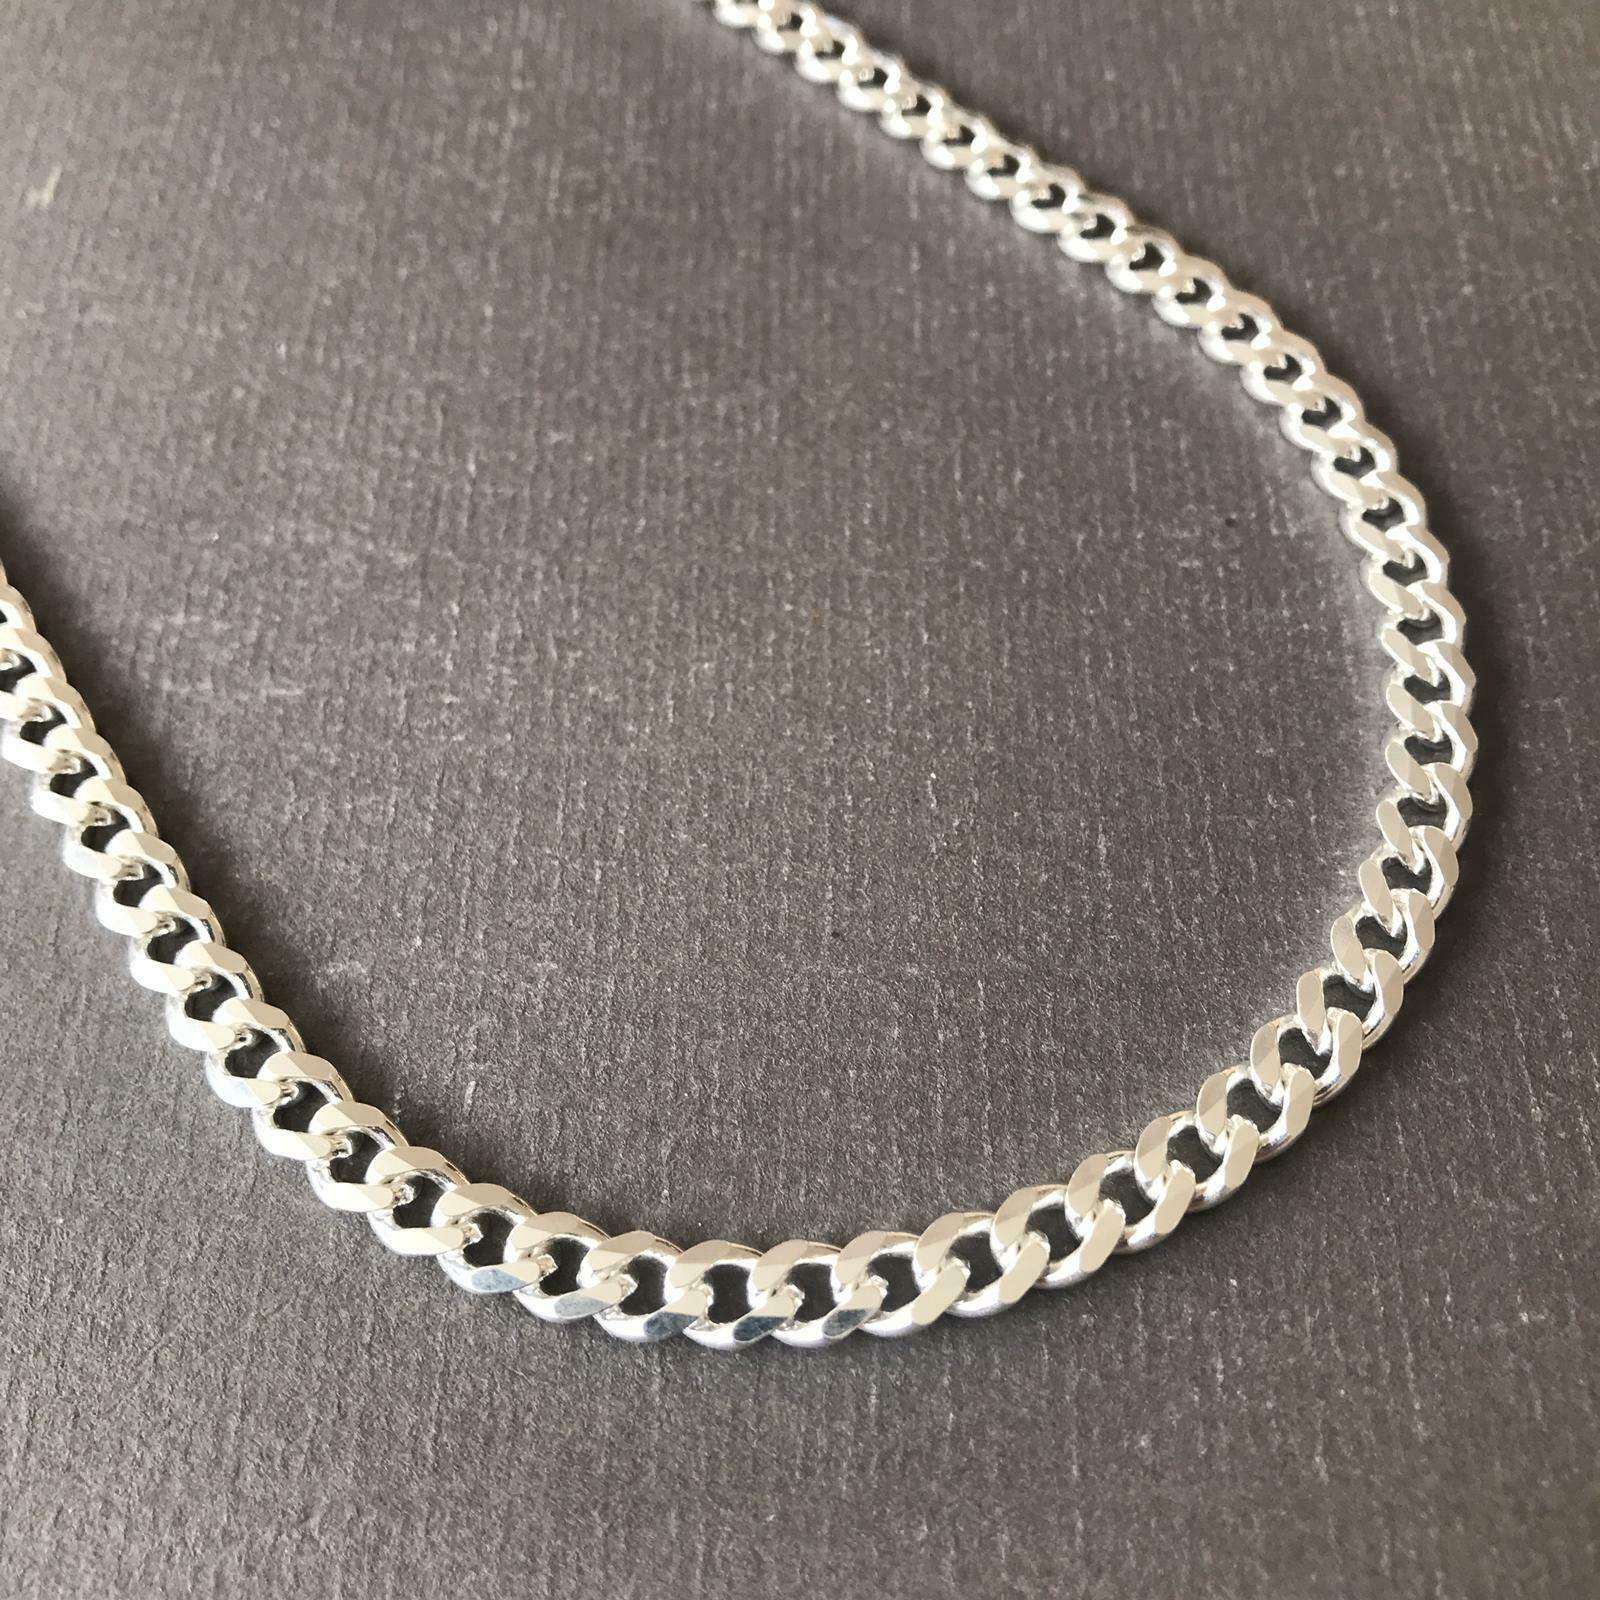 22 Inch 925 Sterling Silver Mens Hip Hop Cuban Link Chain Necklaces 4 ...